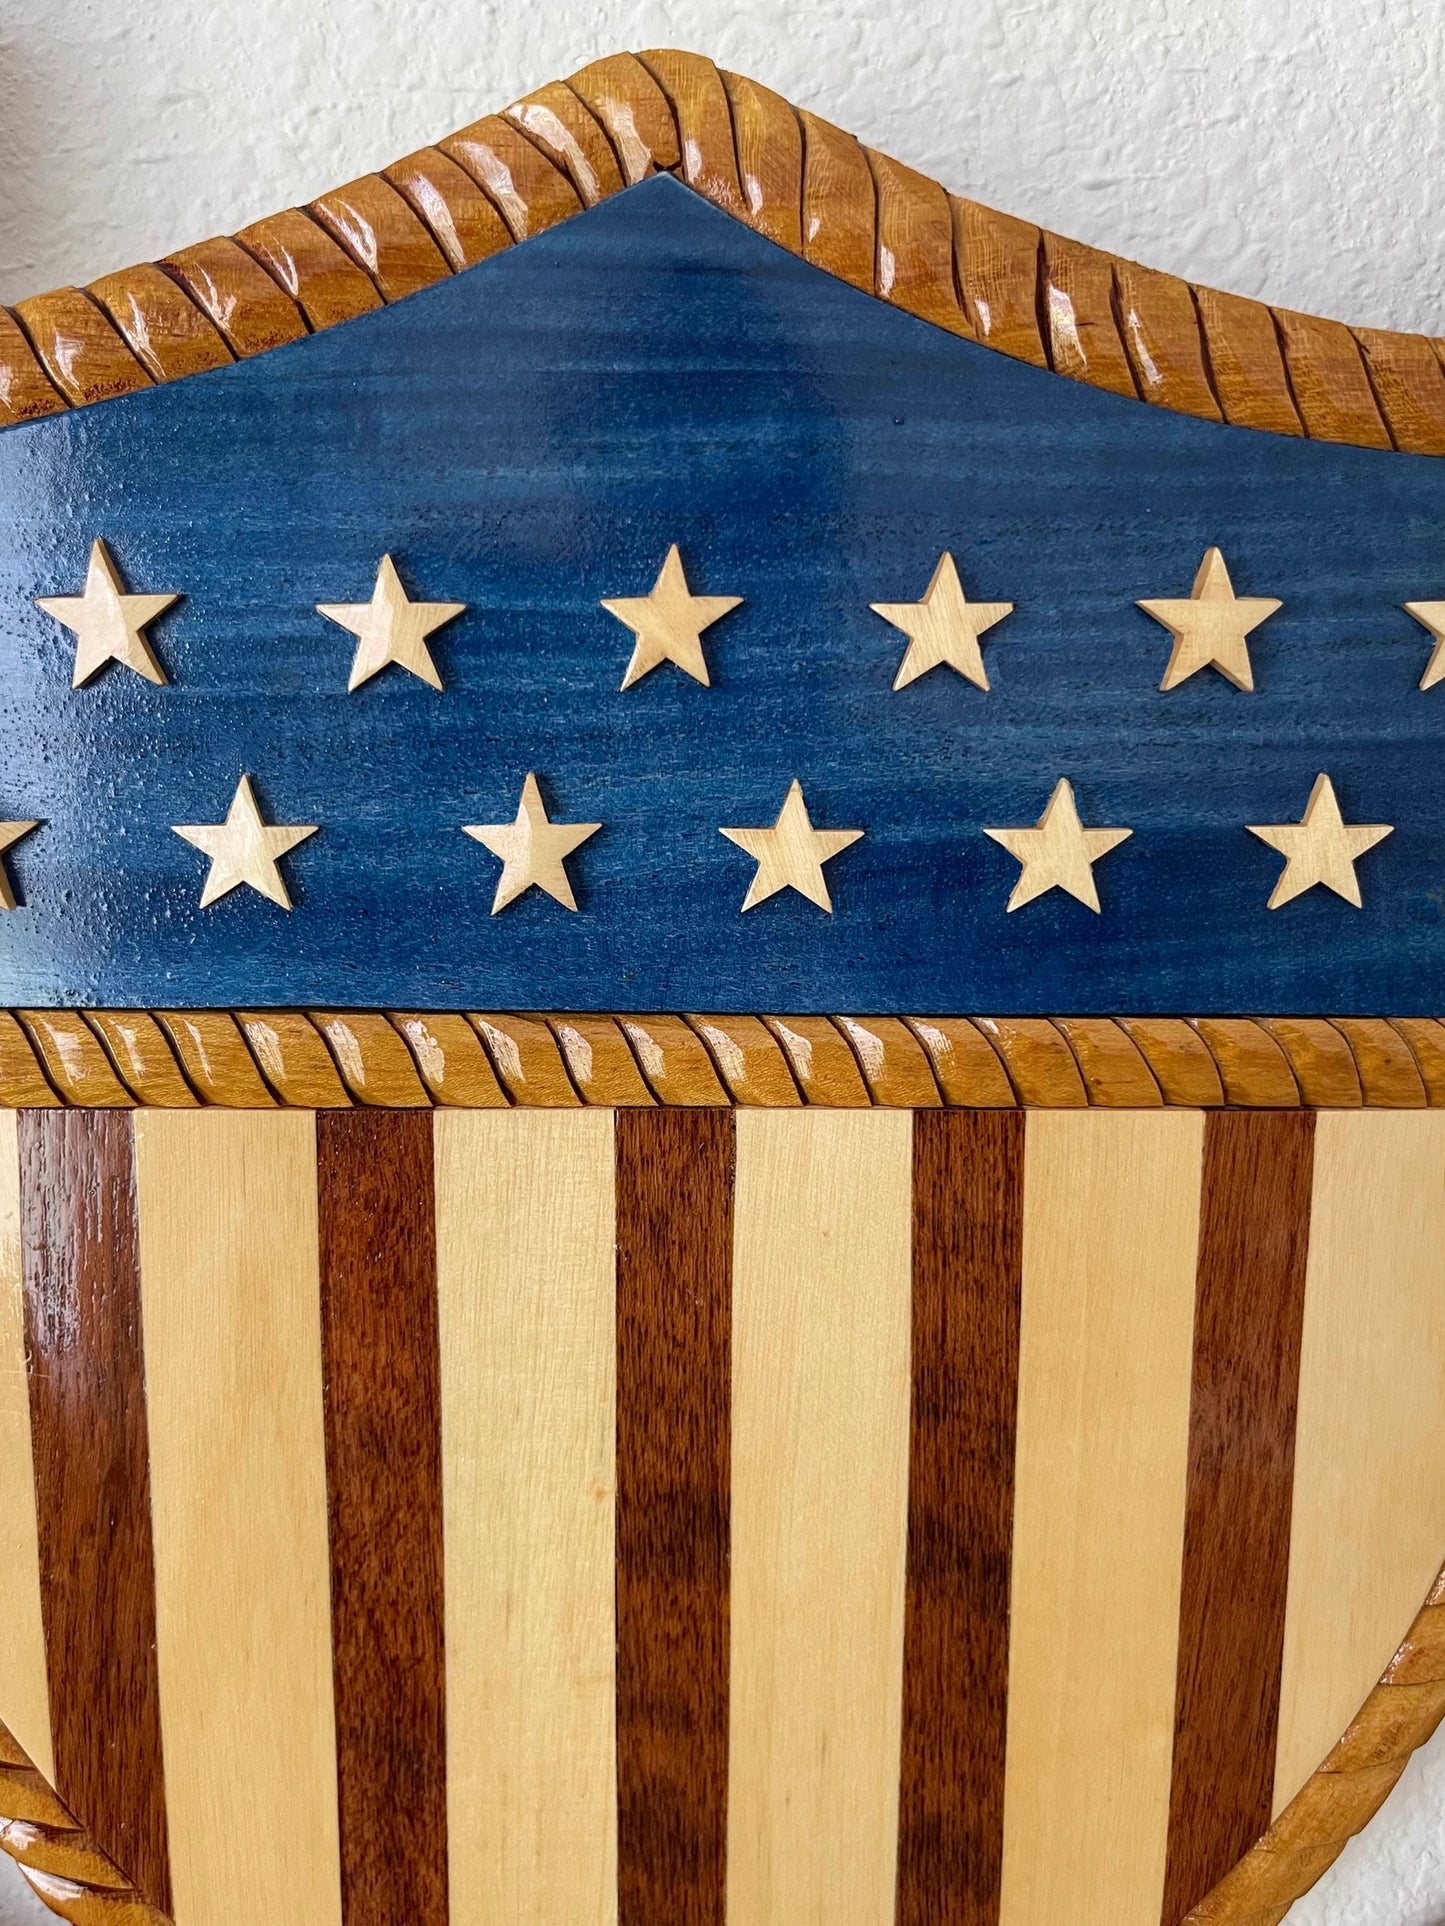 COAST GUARD OFFICER in CHARGE ASHORE Wood Art